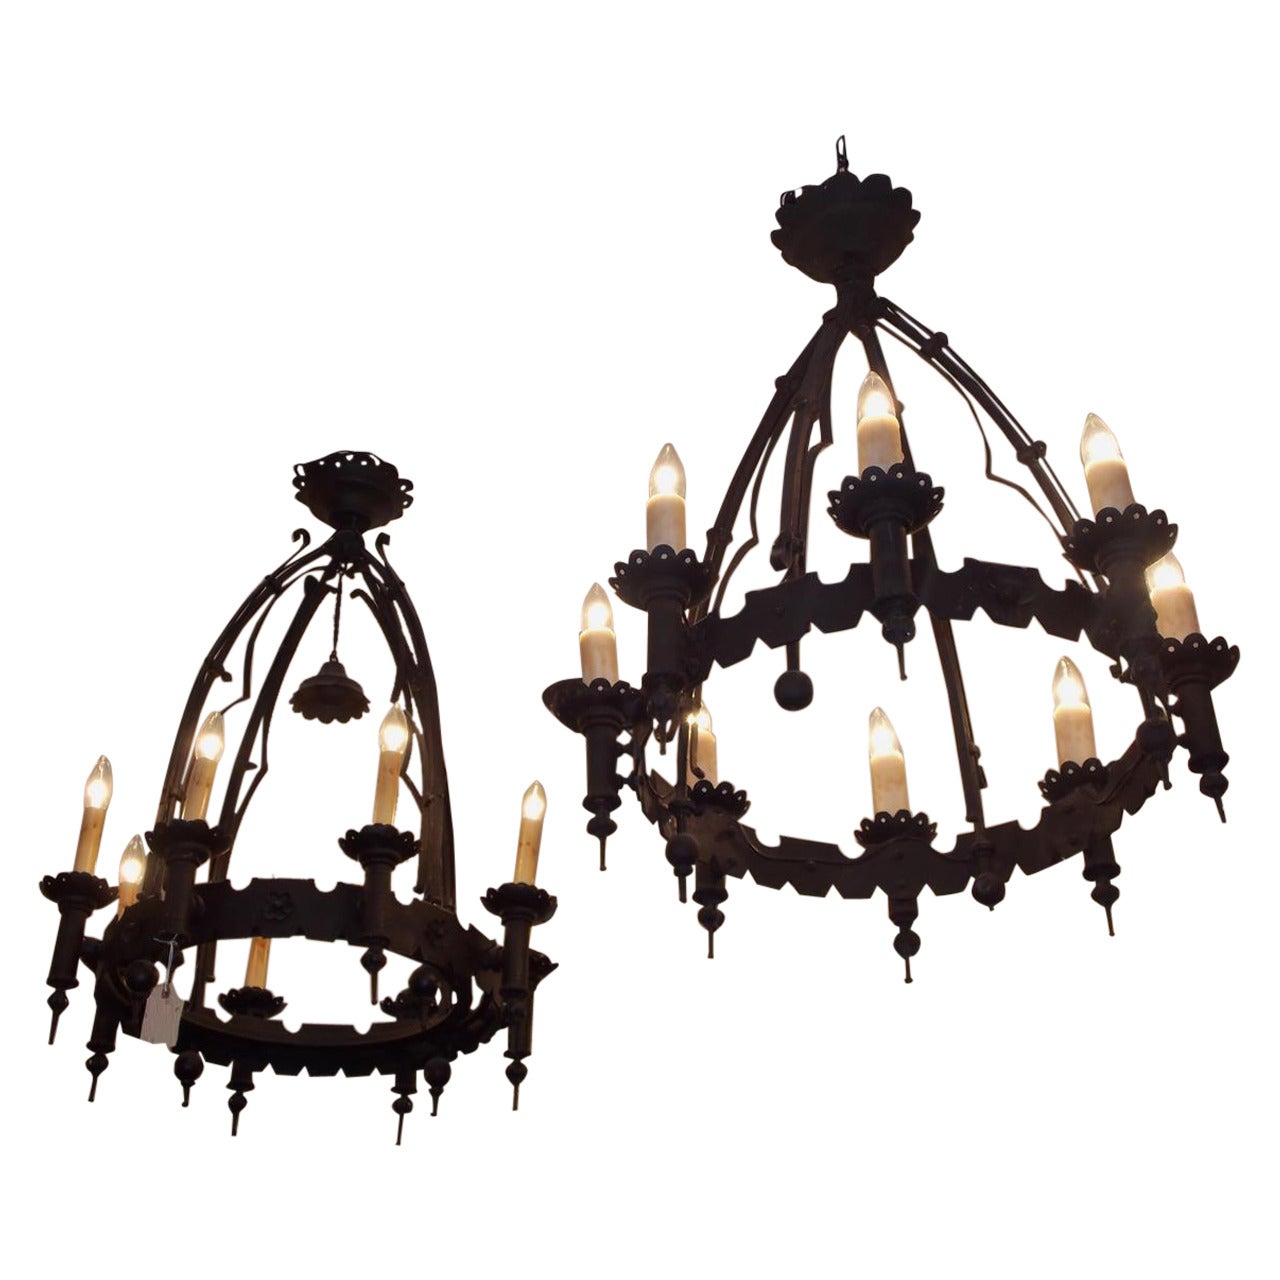 Pair of American Wrought Iron Gasoliers. Circa 1850